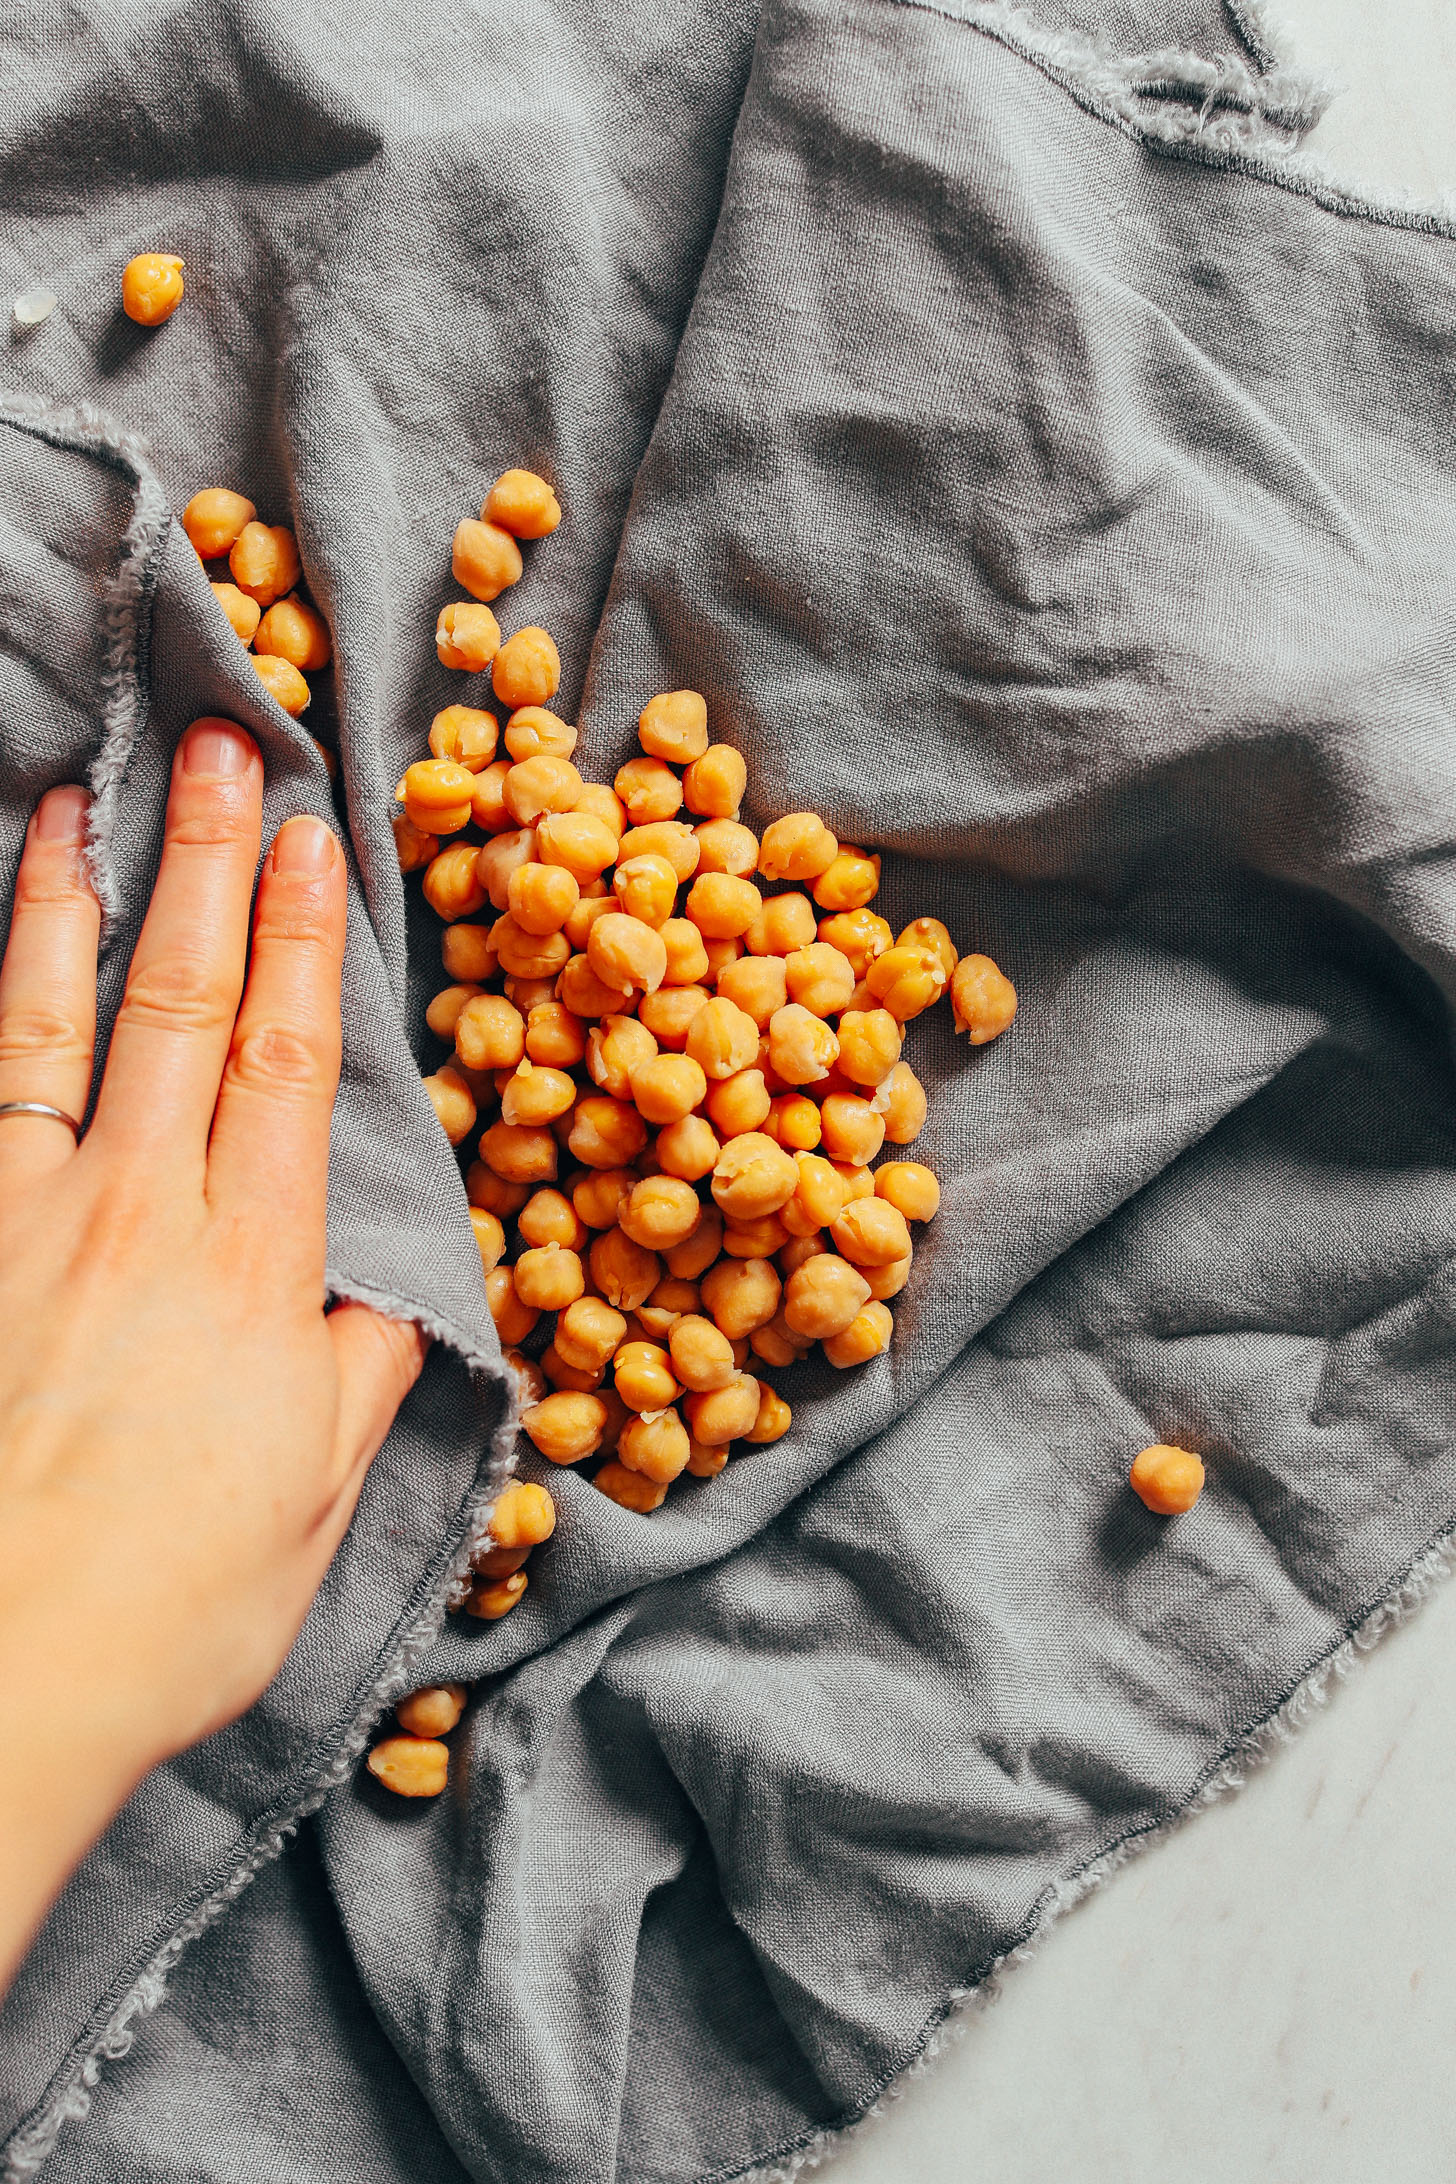 Using a dish towel to remove skins from chickpeas